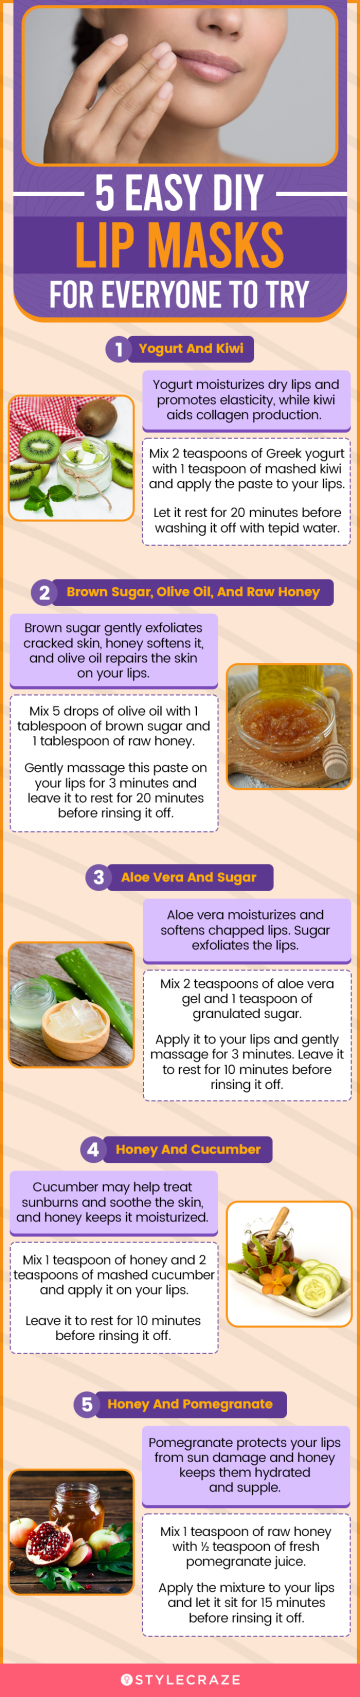 5 easy diy lip masks for everyone to try (infographic)